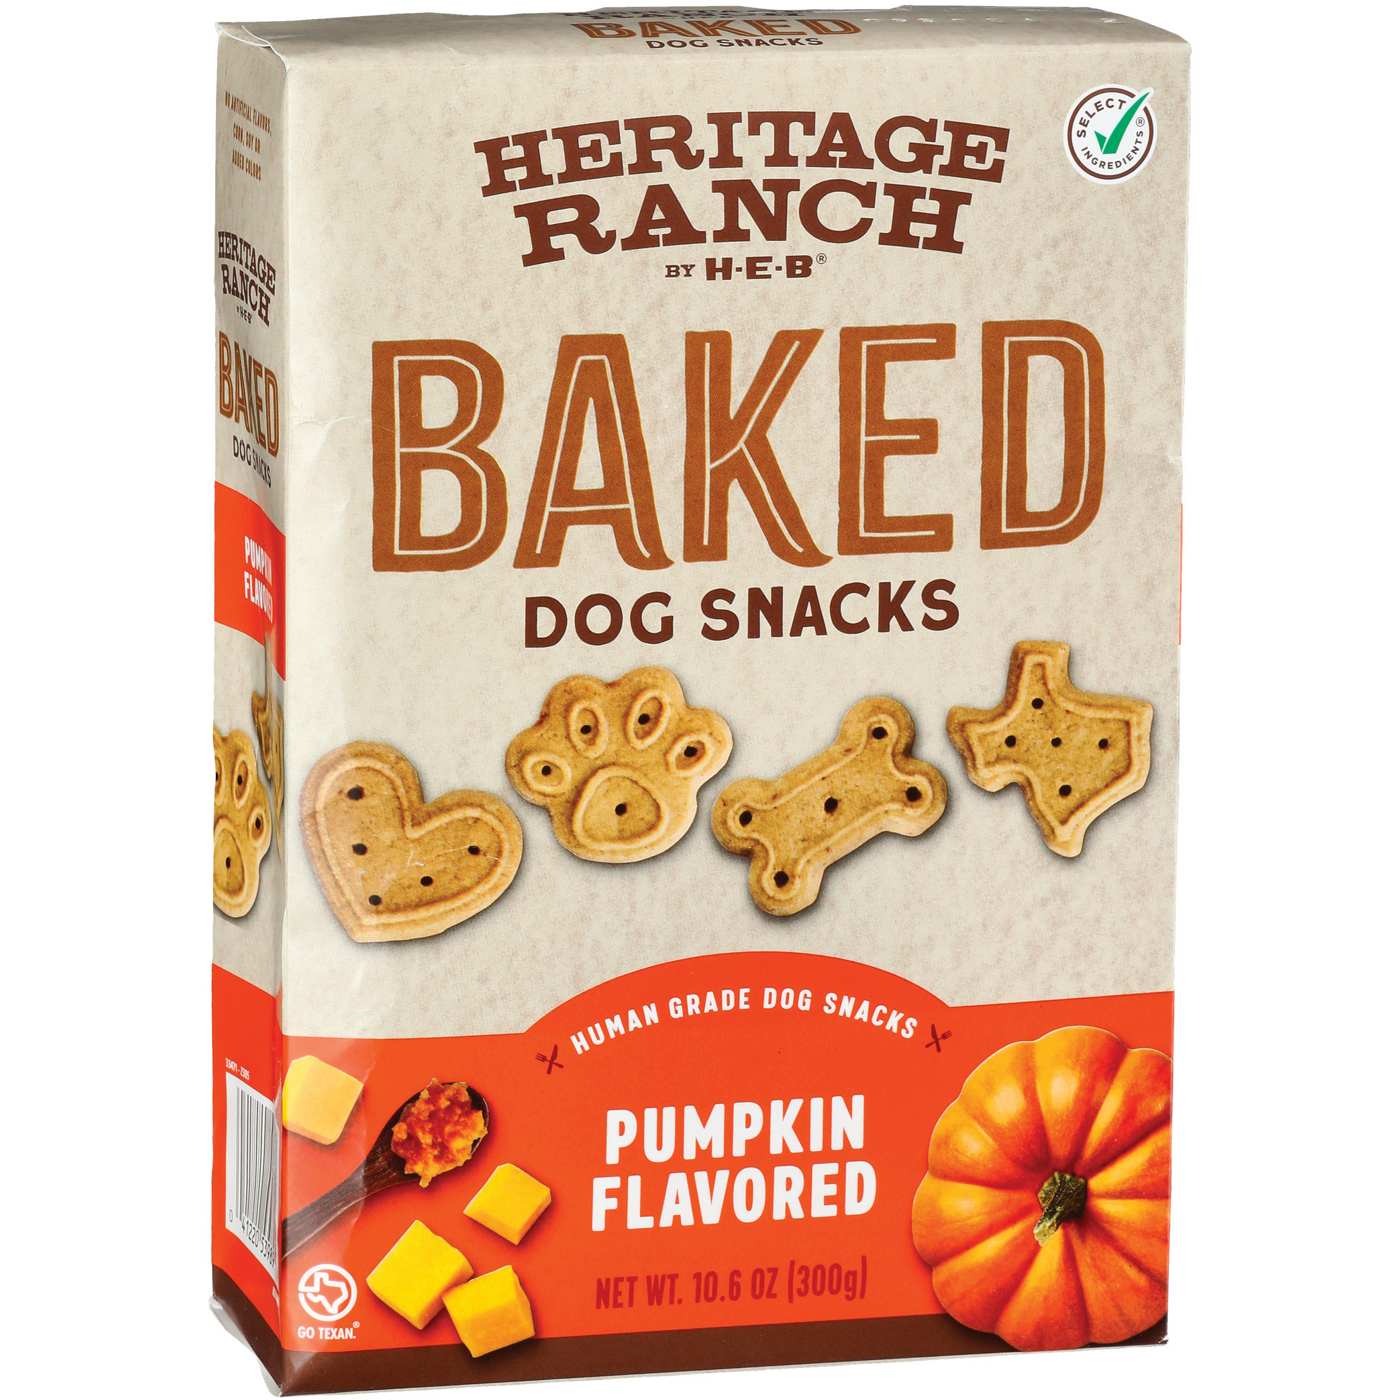 Heritage Ranch by H-E-B Baked Dog Snacks – Pumpkin; image 2 of 2